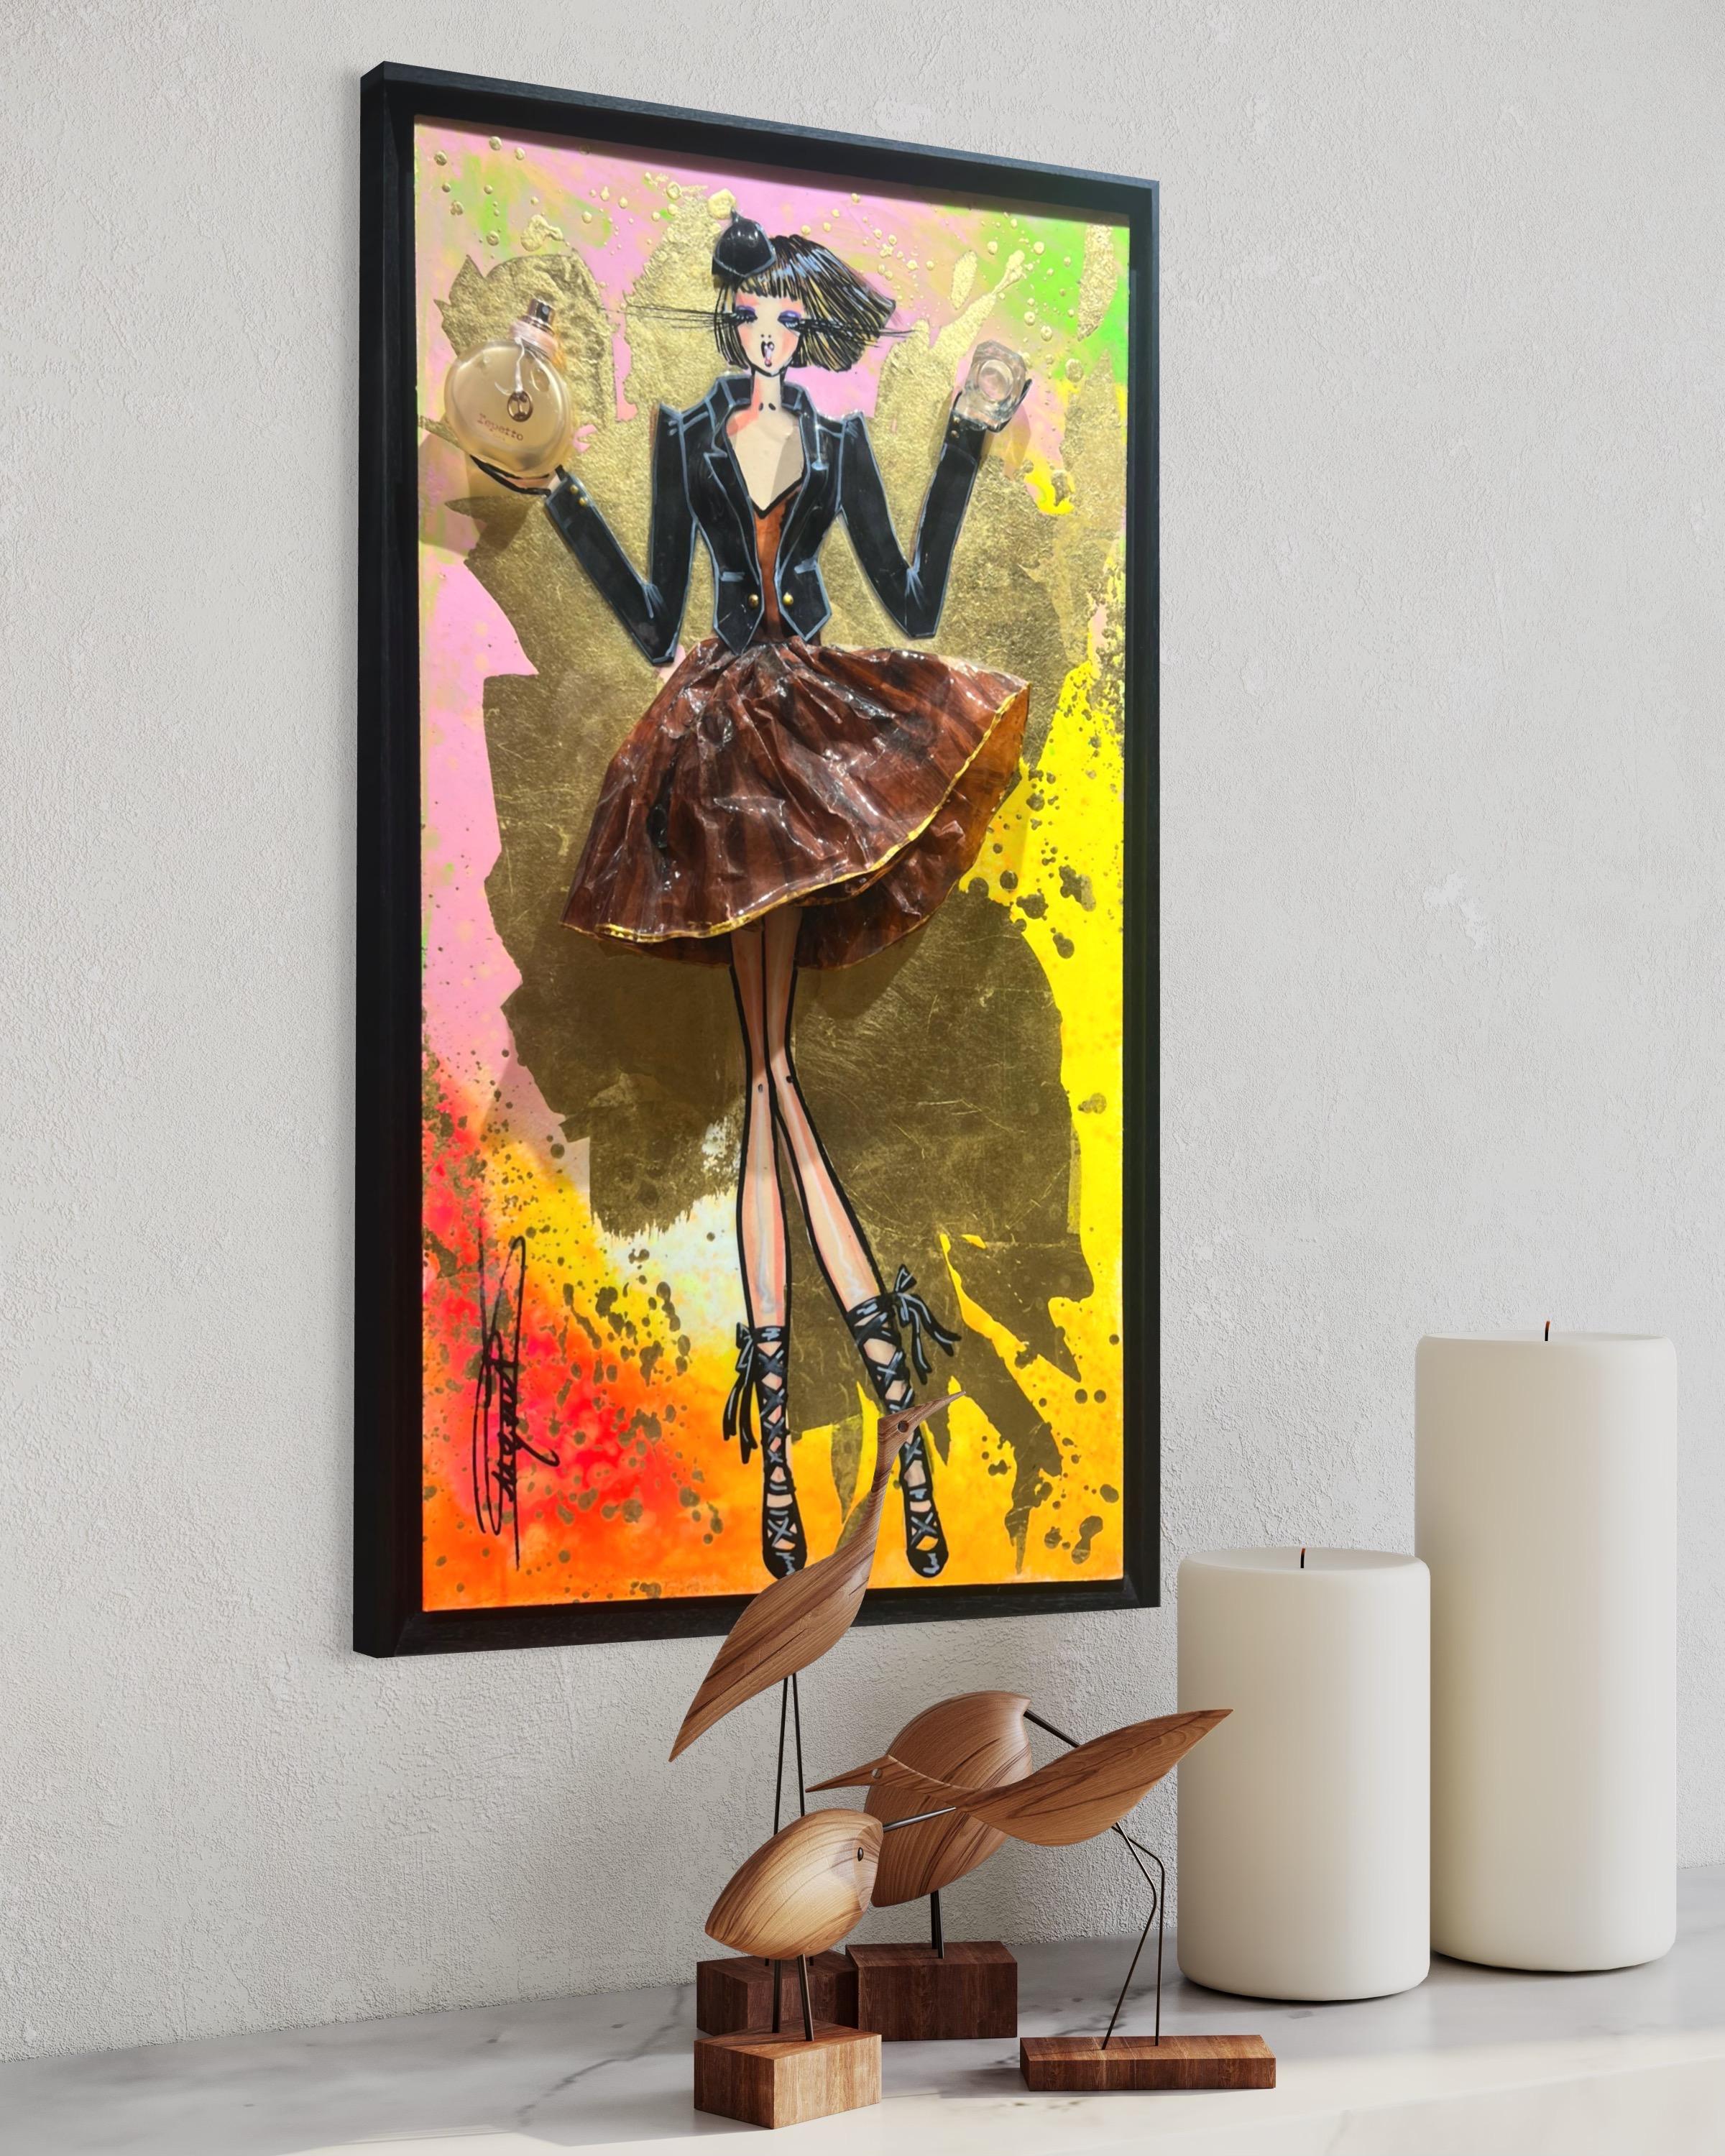  Baby Doll, Repetto Tribute 2023 - Pop Art Mixed Media Art by RACHEL BERGERET